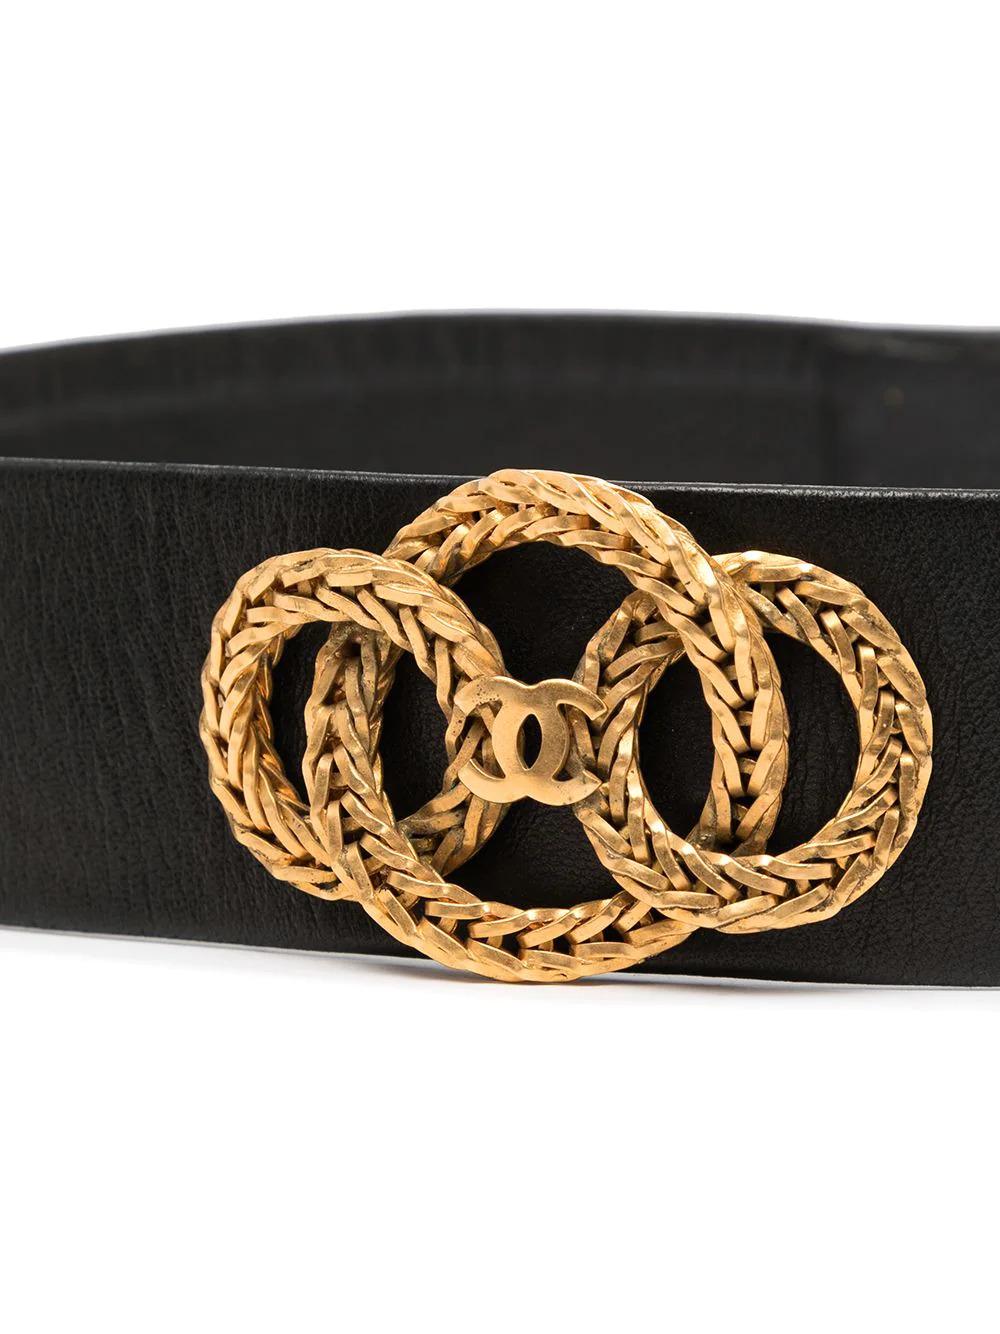 Take your accessories repertoire to whimsical heights with this vintage Chanel belt. It was designed in 1988 as part of the Haute Couture collection, five years after Karl Lagerfeld had been inducted to creative director of the house. Imbued with